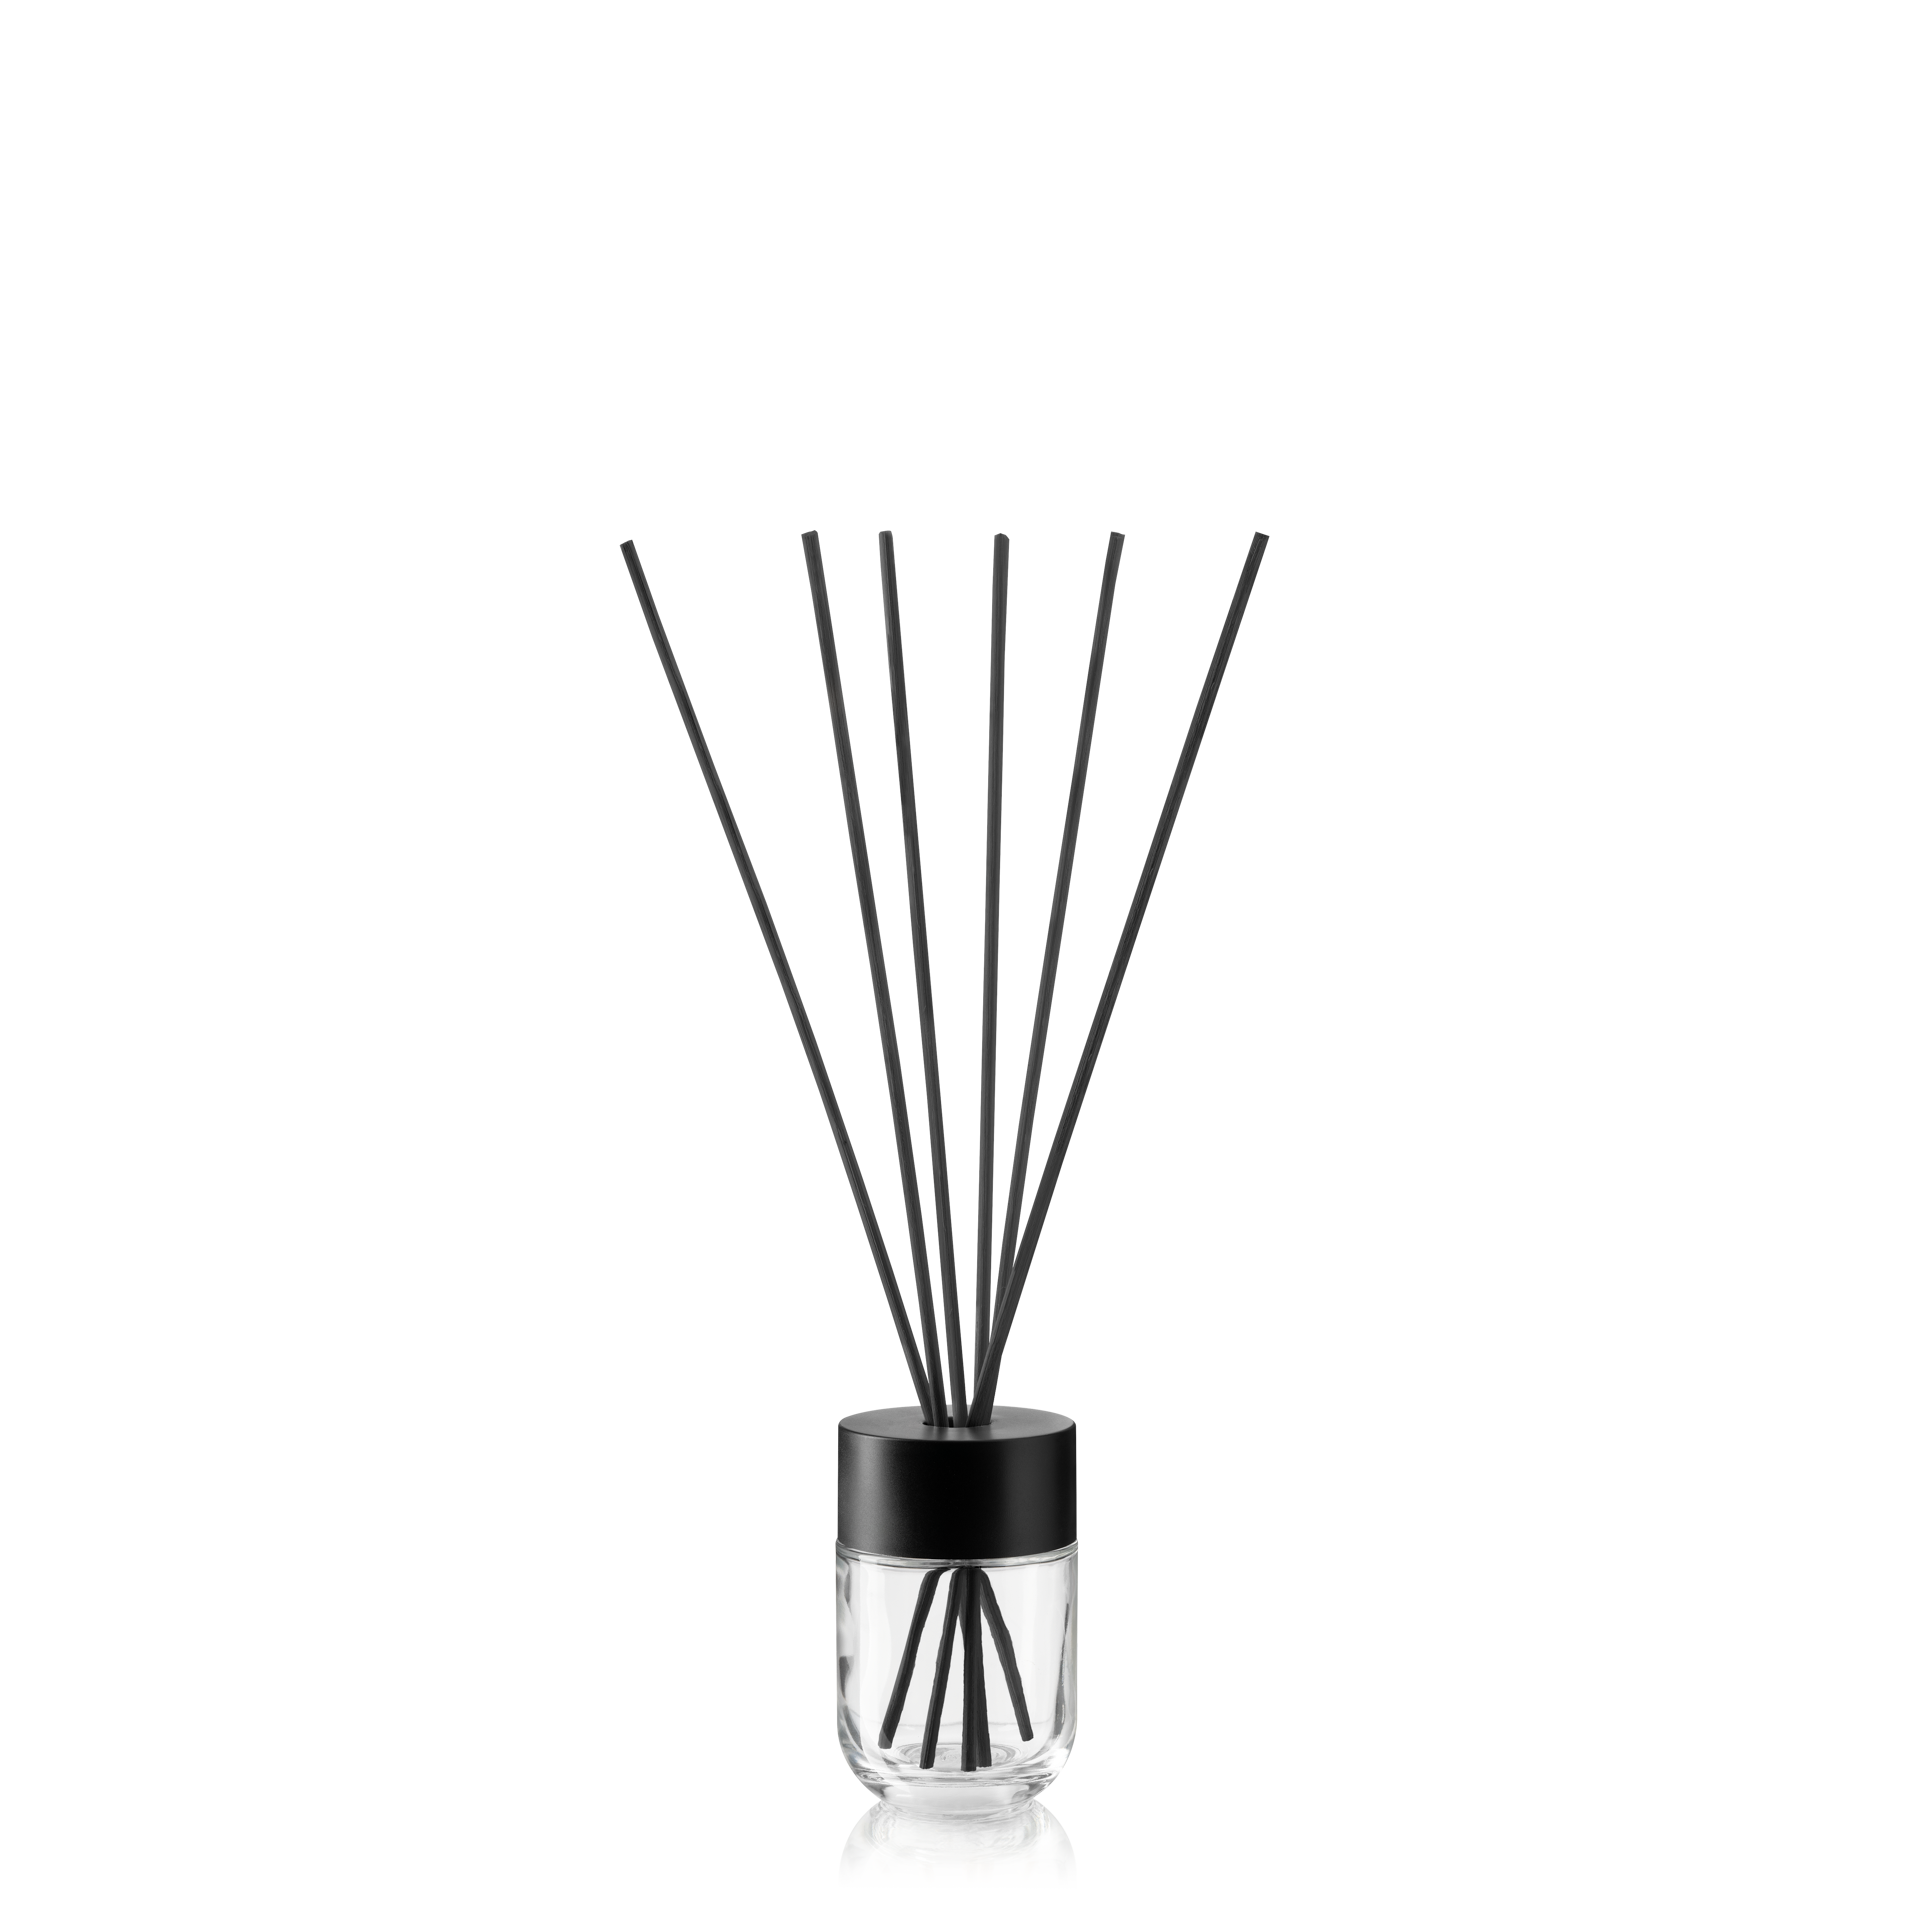 Diffuser sticks, rattan, black matte Type B, 3.5mm thick, 300mm, packed in bundles of 6 pieces